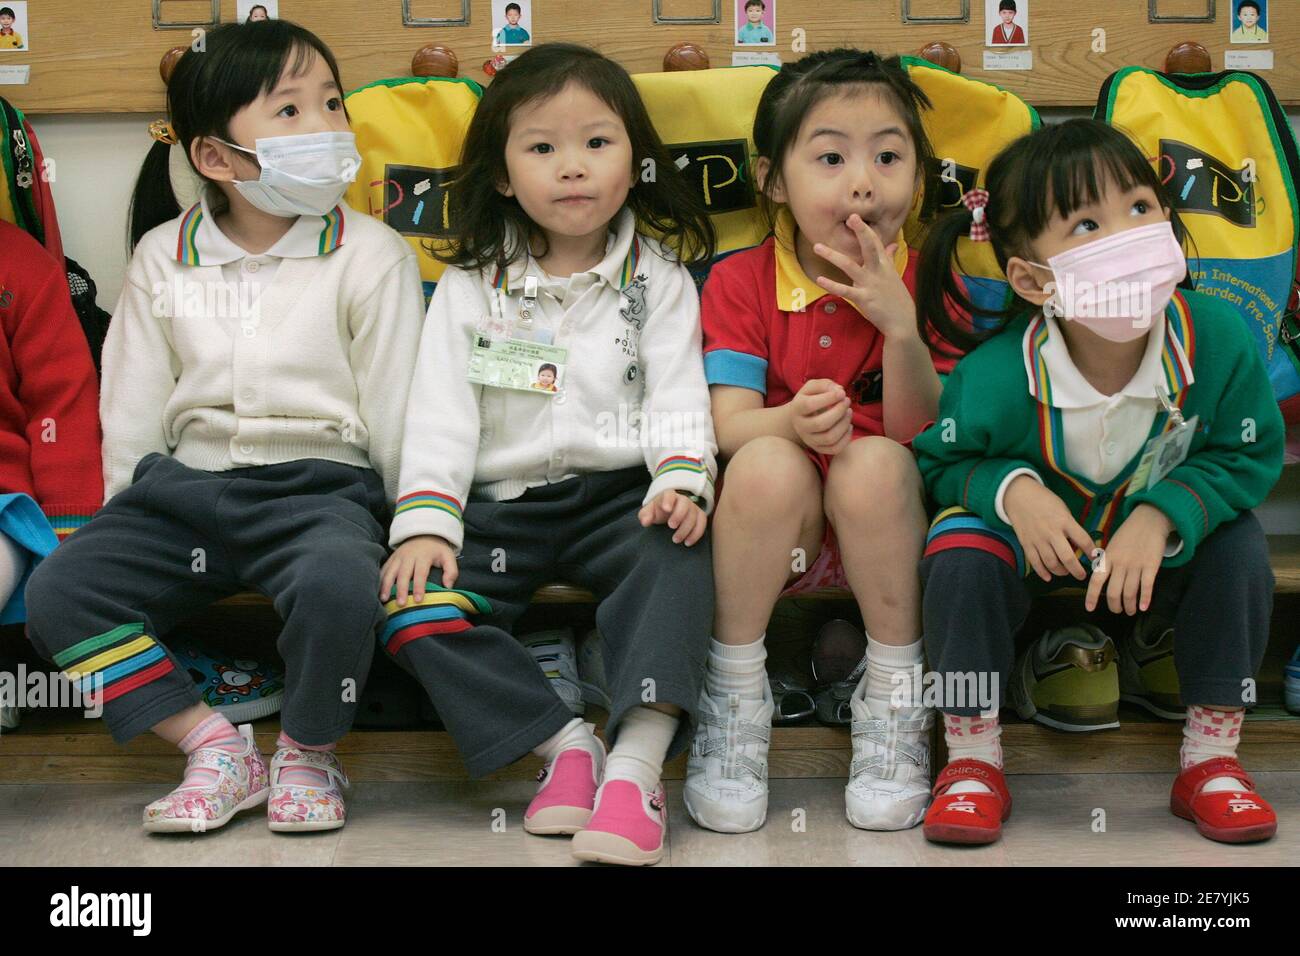 Kindergarten students wear masks while attending a lesson in Hong Kong April 30, 2009. The World Health Organization said on Wednesday the world is at the brink of a pandemic, raising its threat level as the swine flu virus spread and killed the first person outside of Mexico, a toddler in Texas.     REUTERS/Tyrone Siu    (CHINA EDUCATION HEALTH) Stock Photo